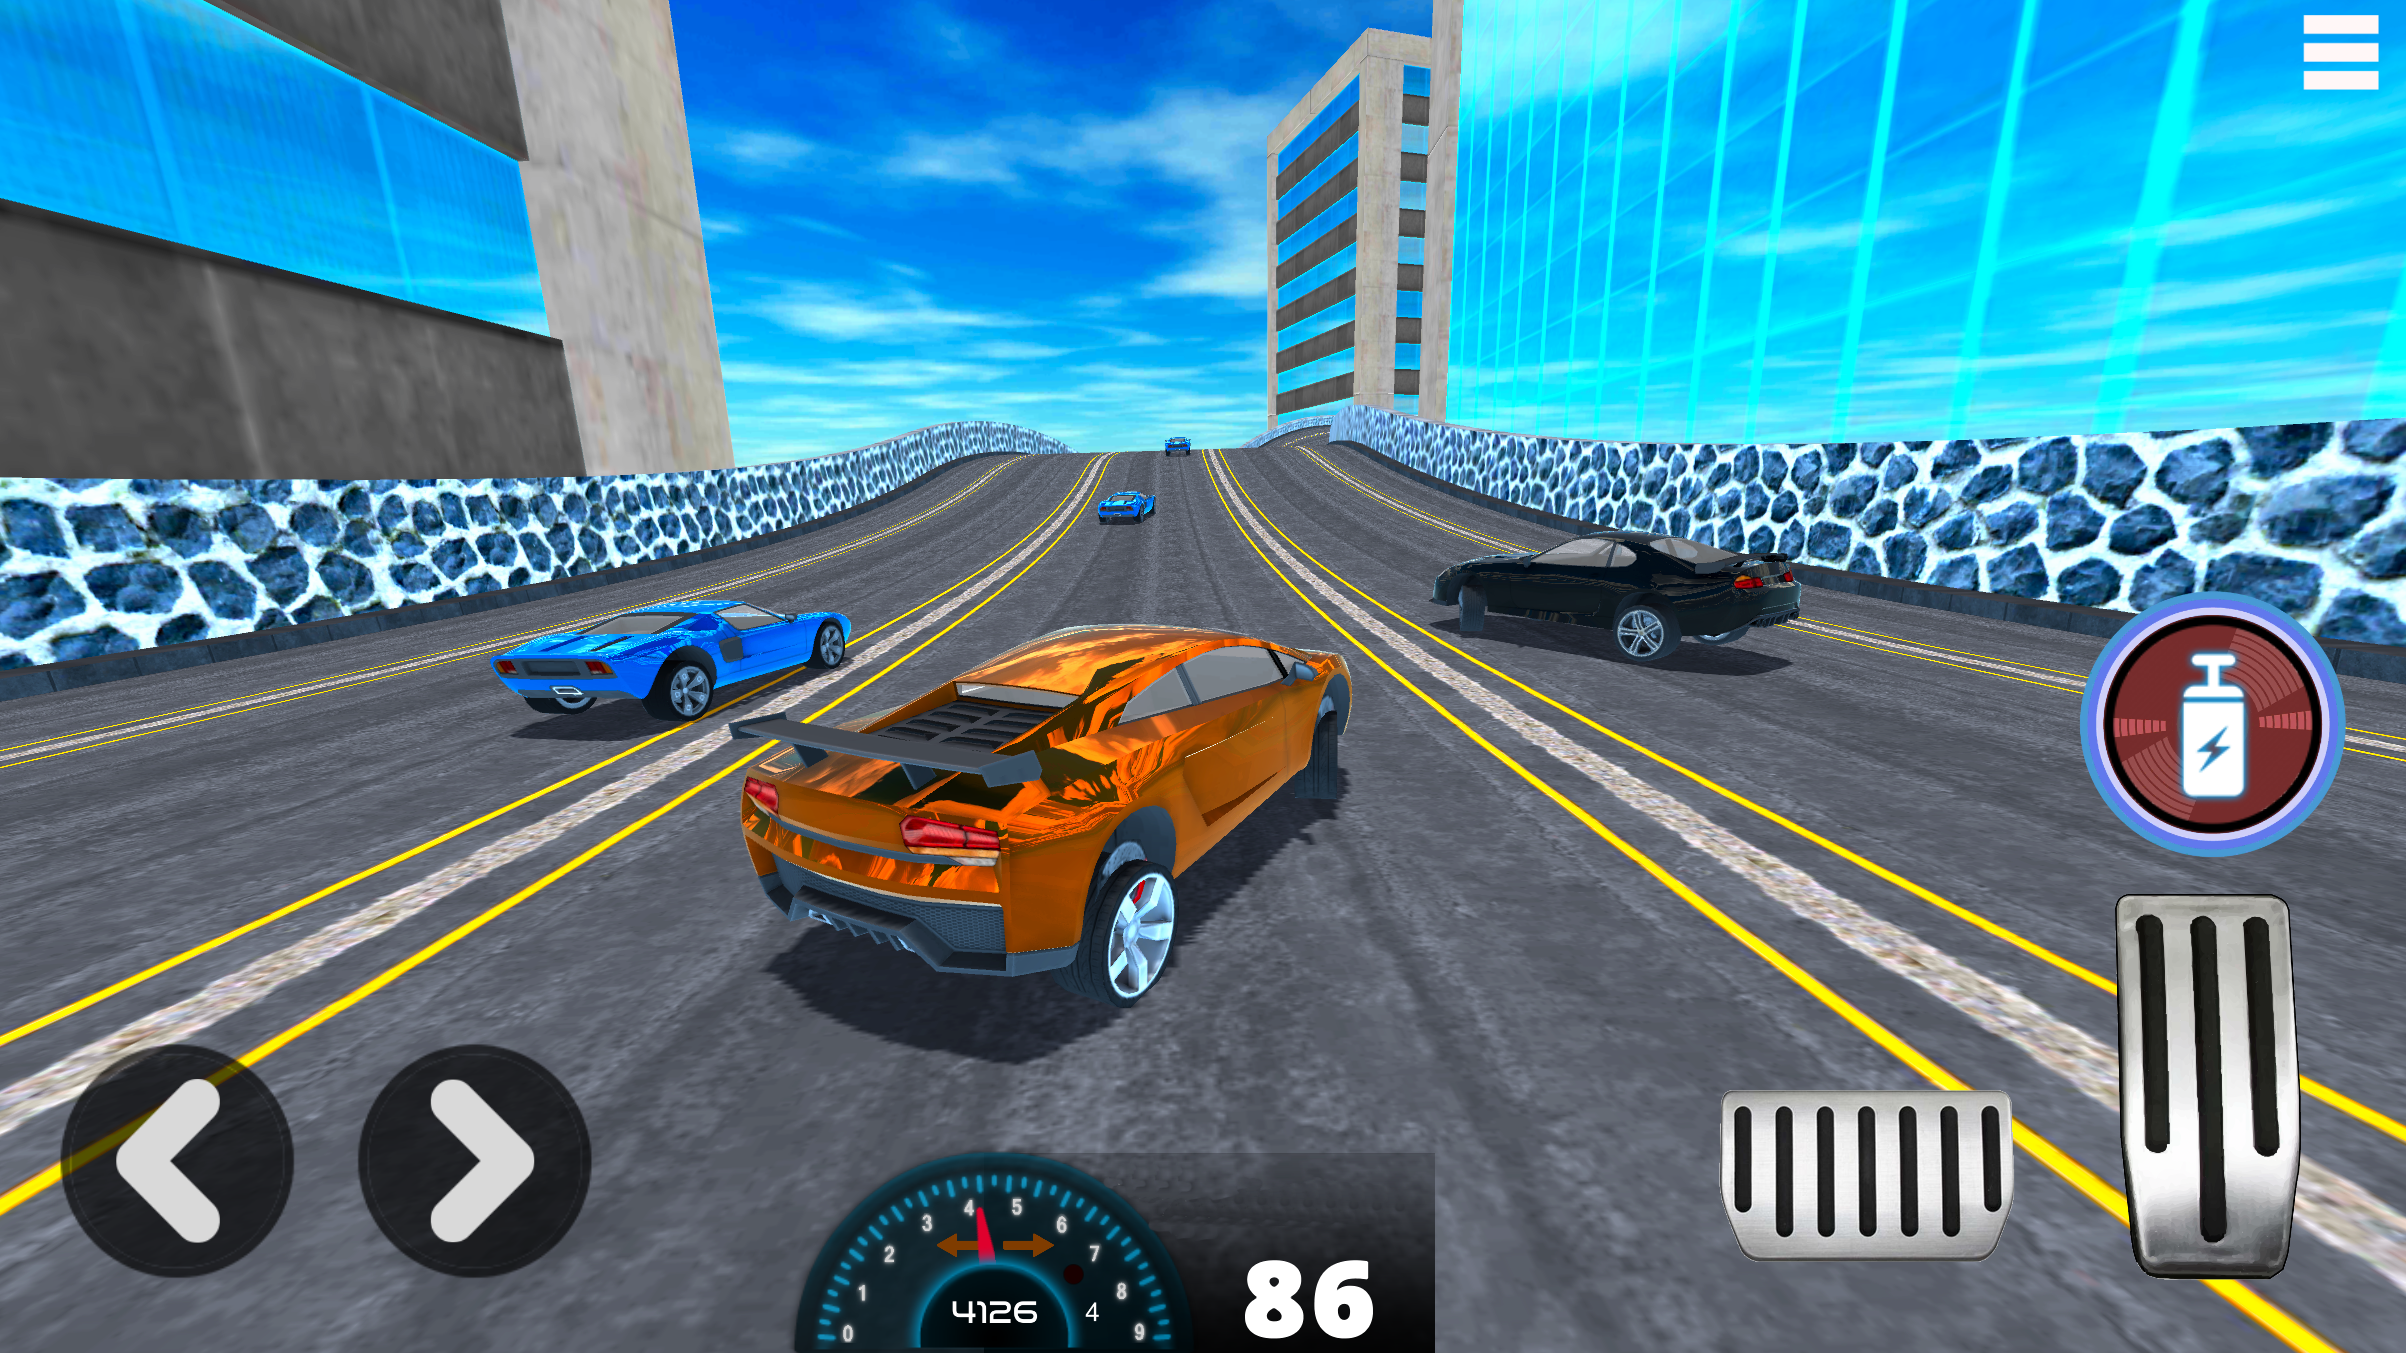 REAL CARS IN CITY - Jogue Grátis Online!